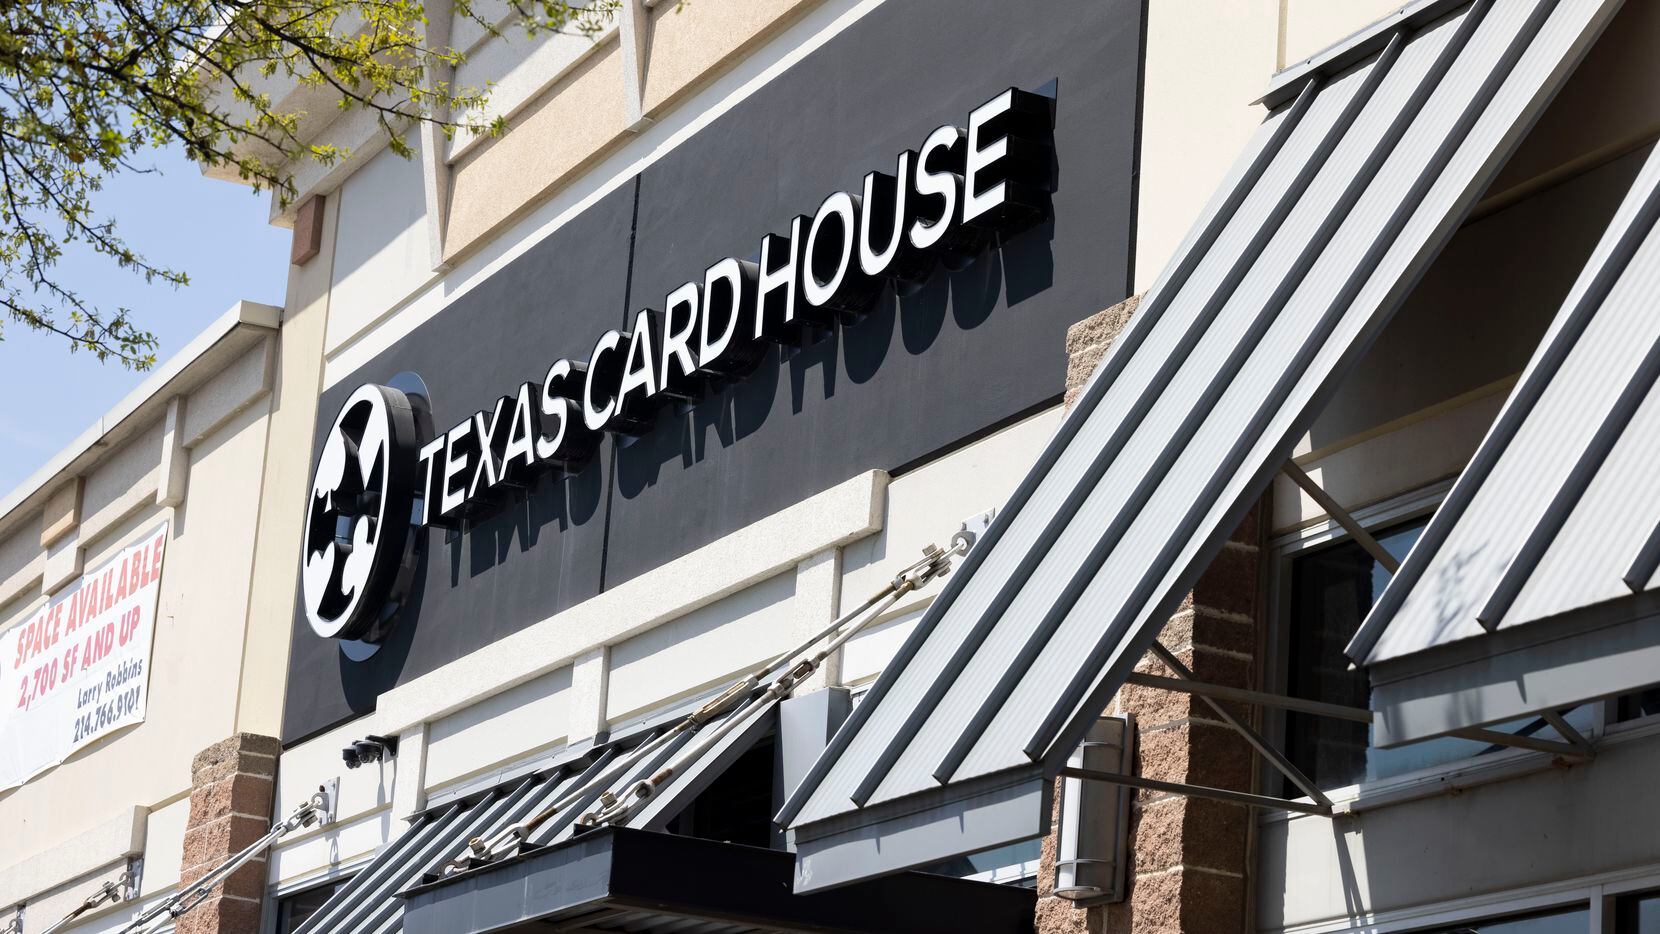 The exterior of Texas Card House, a poker club in Dallas, in 2022.